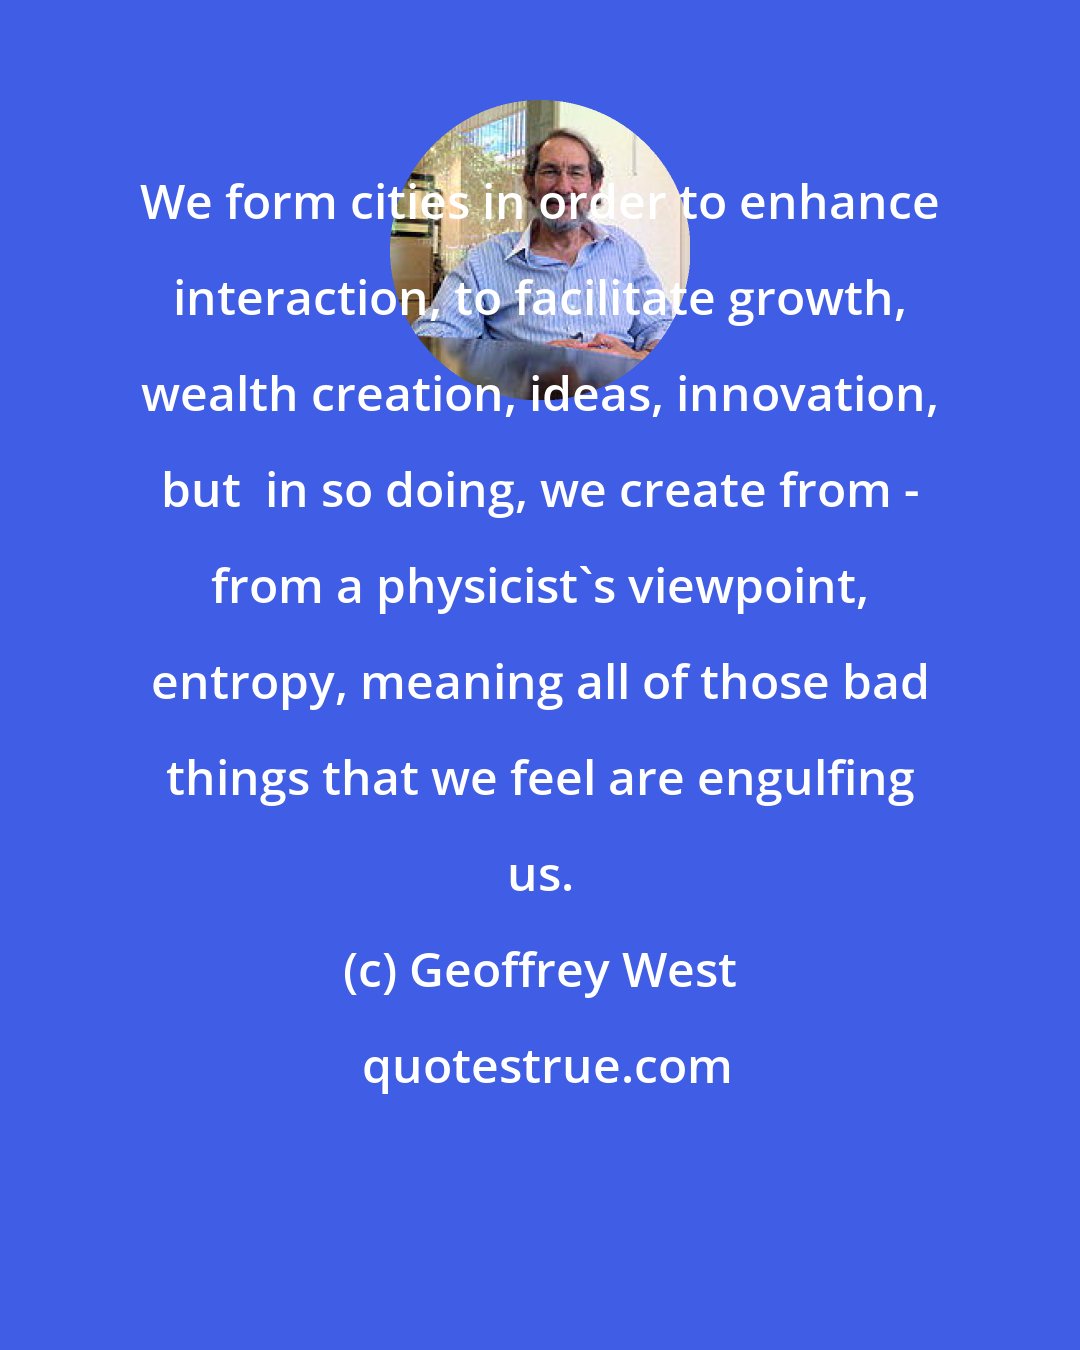 Geoffrey West: We form cities in order to enhance interaction, to facilitate growth, wealth creation, ideas, innovation, but  in so doing, we create from - from a physicist's viewpoint, entropy, meaning all of those bad things that we feel are engulfing us.